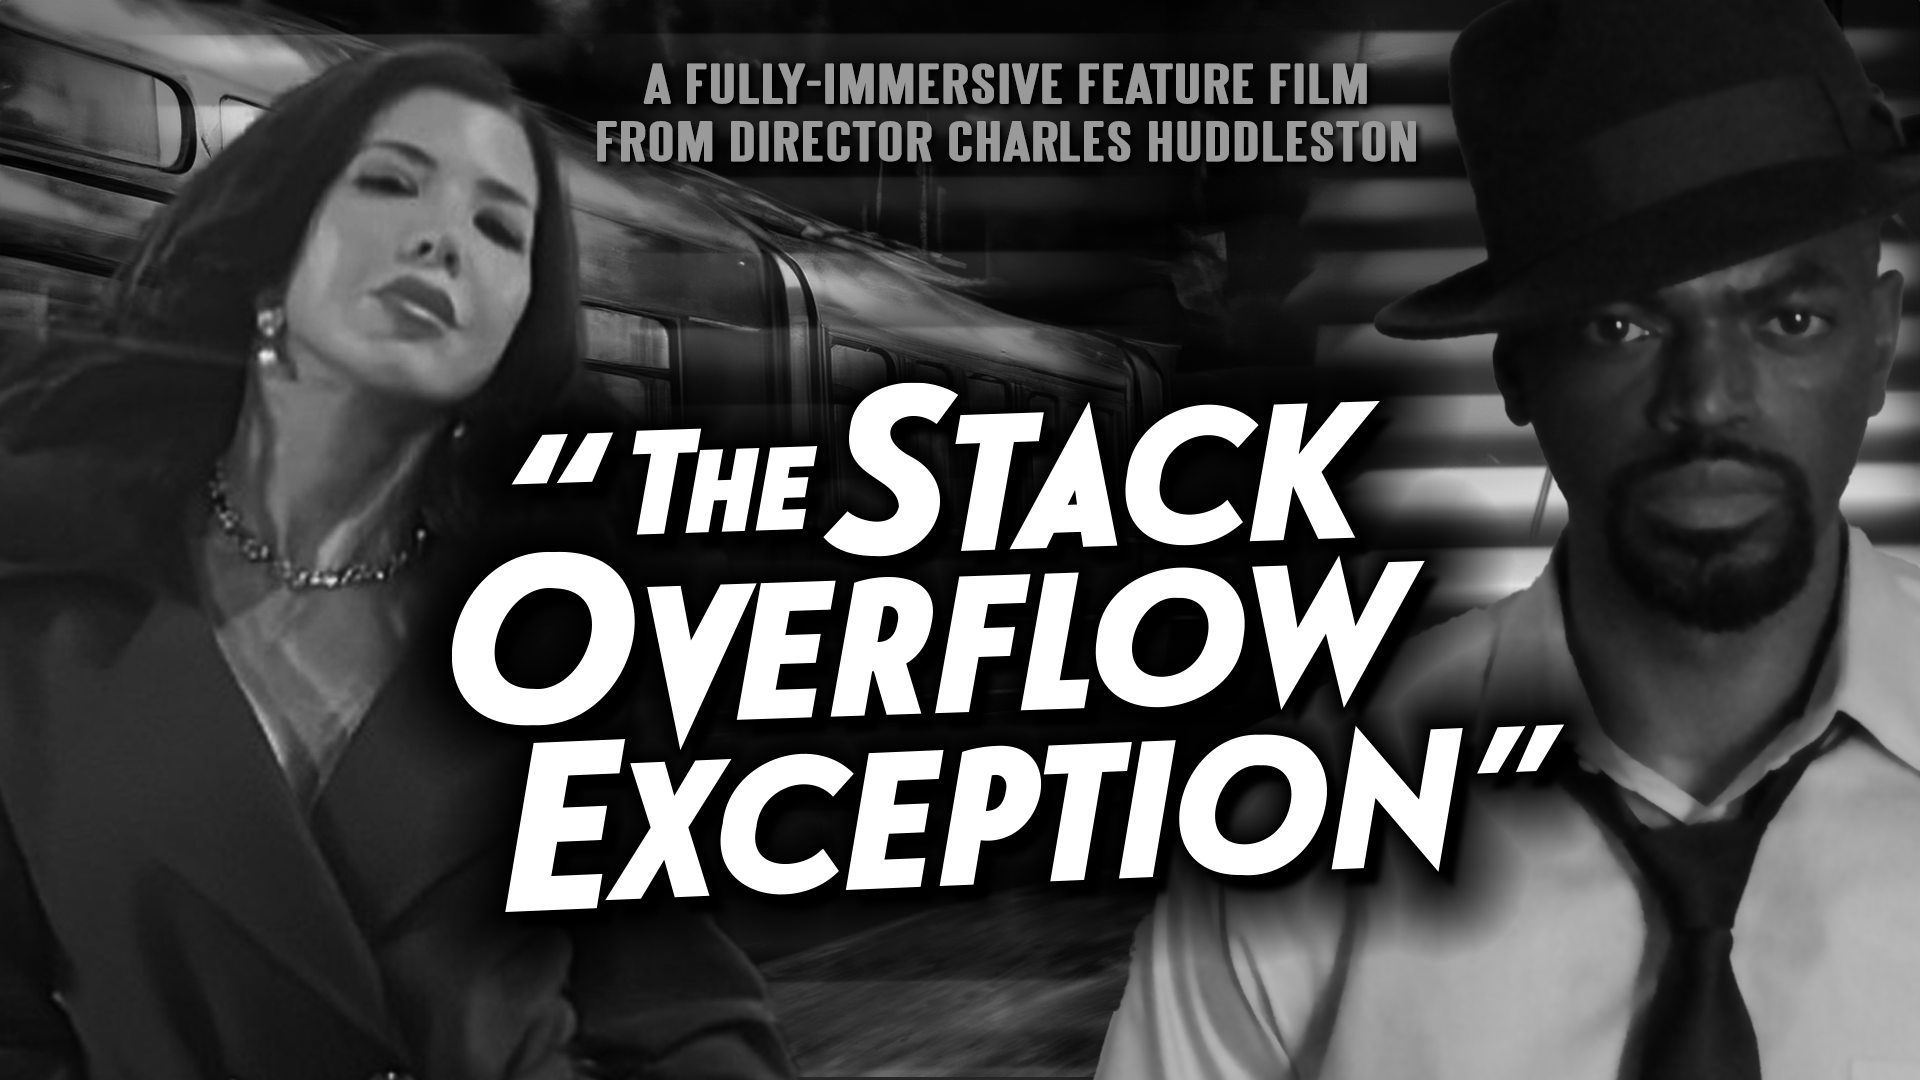 A film noir-style movie poster for The Stack Overflow Exception, featuring a beautiful femme fatale and a serious private detective.